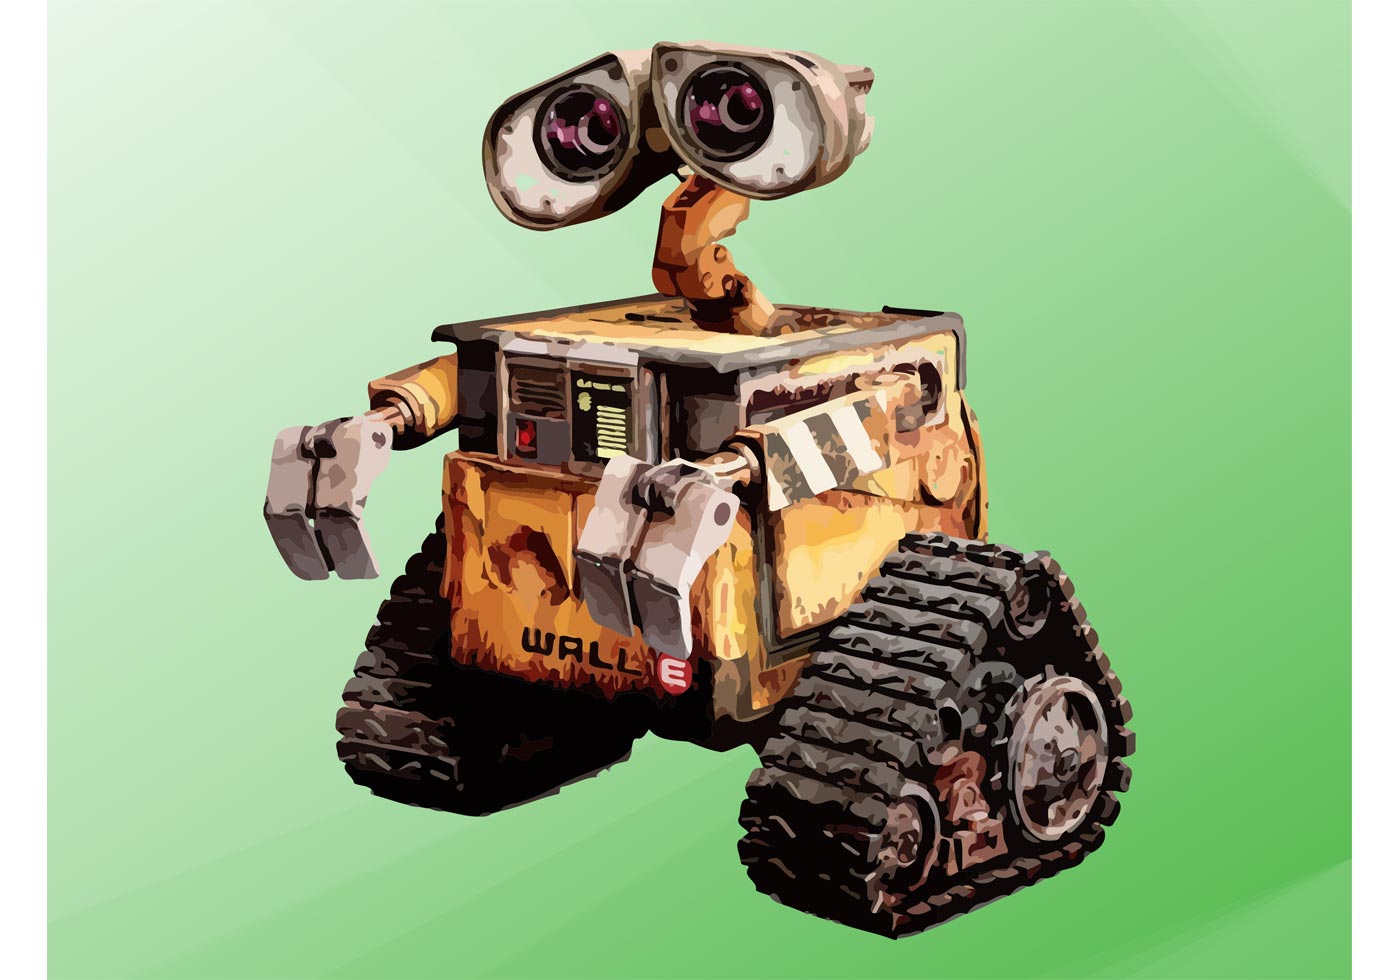 Browse 99 incredible Wall E vectors, icons, clipart graphics, and backgroun...